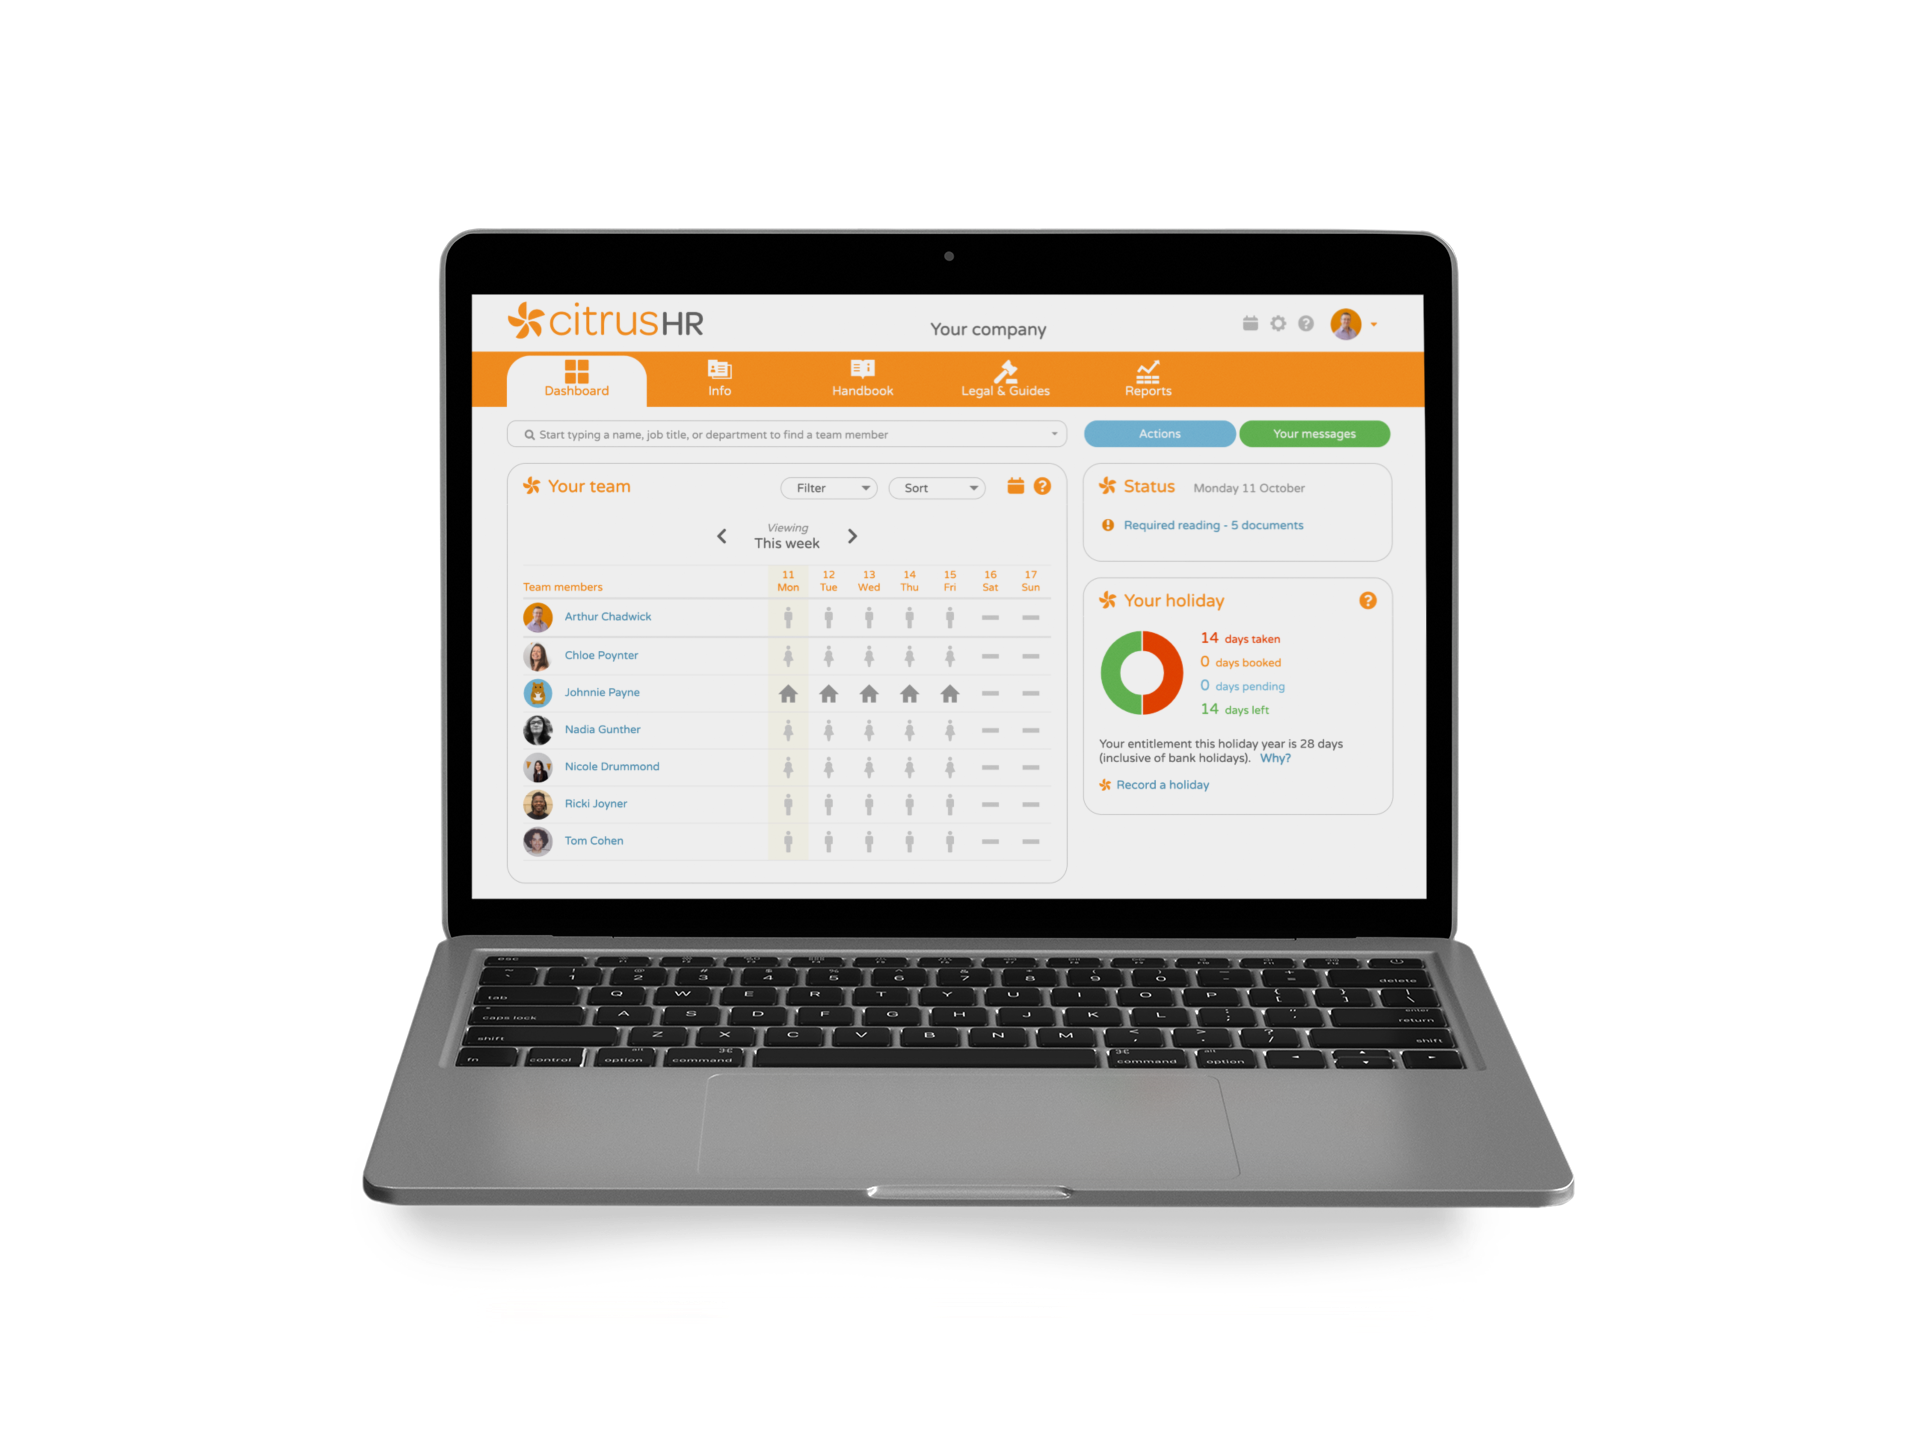 citrusHR Software - The dashboard provides an overview of staff absences by week, information on the user's holidays at a glance, quick access to actions, and more